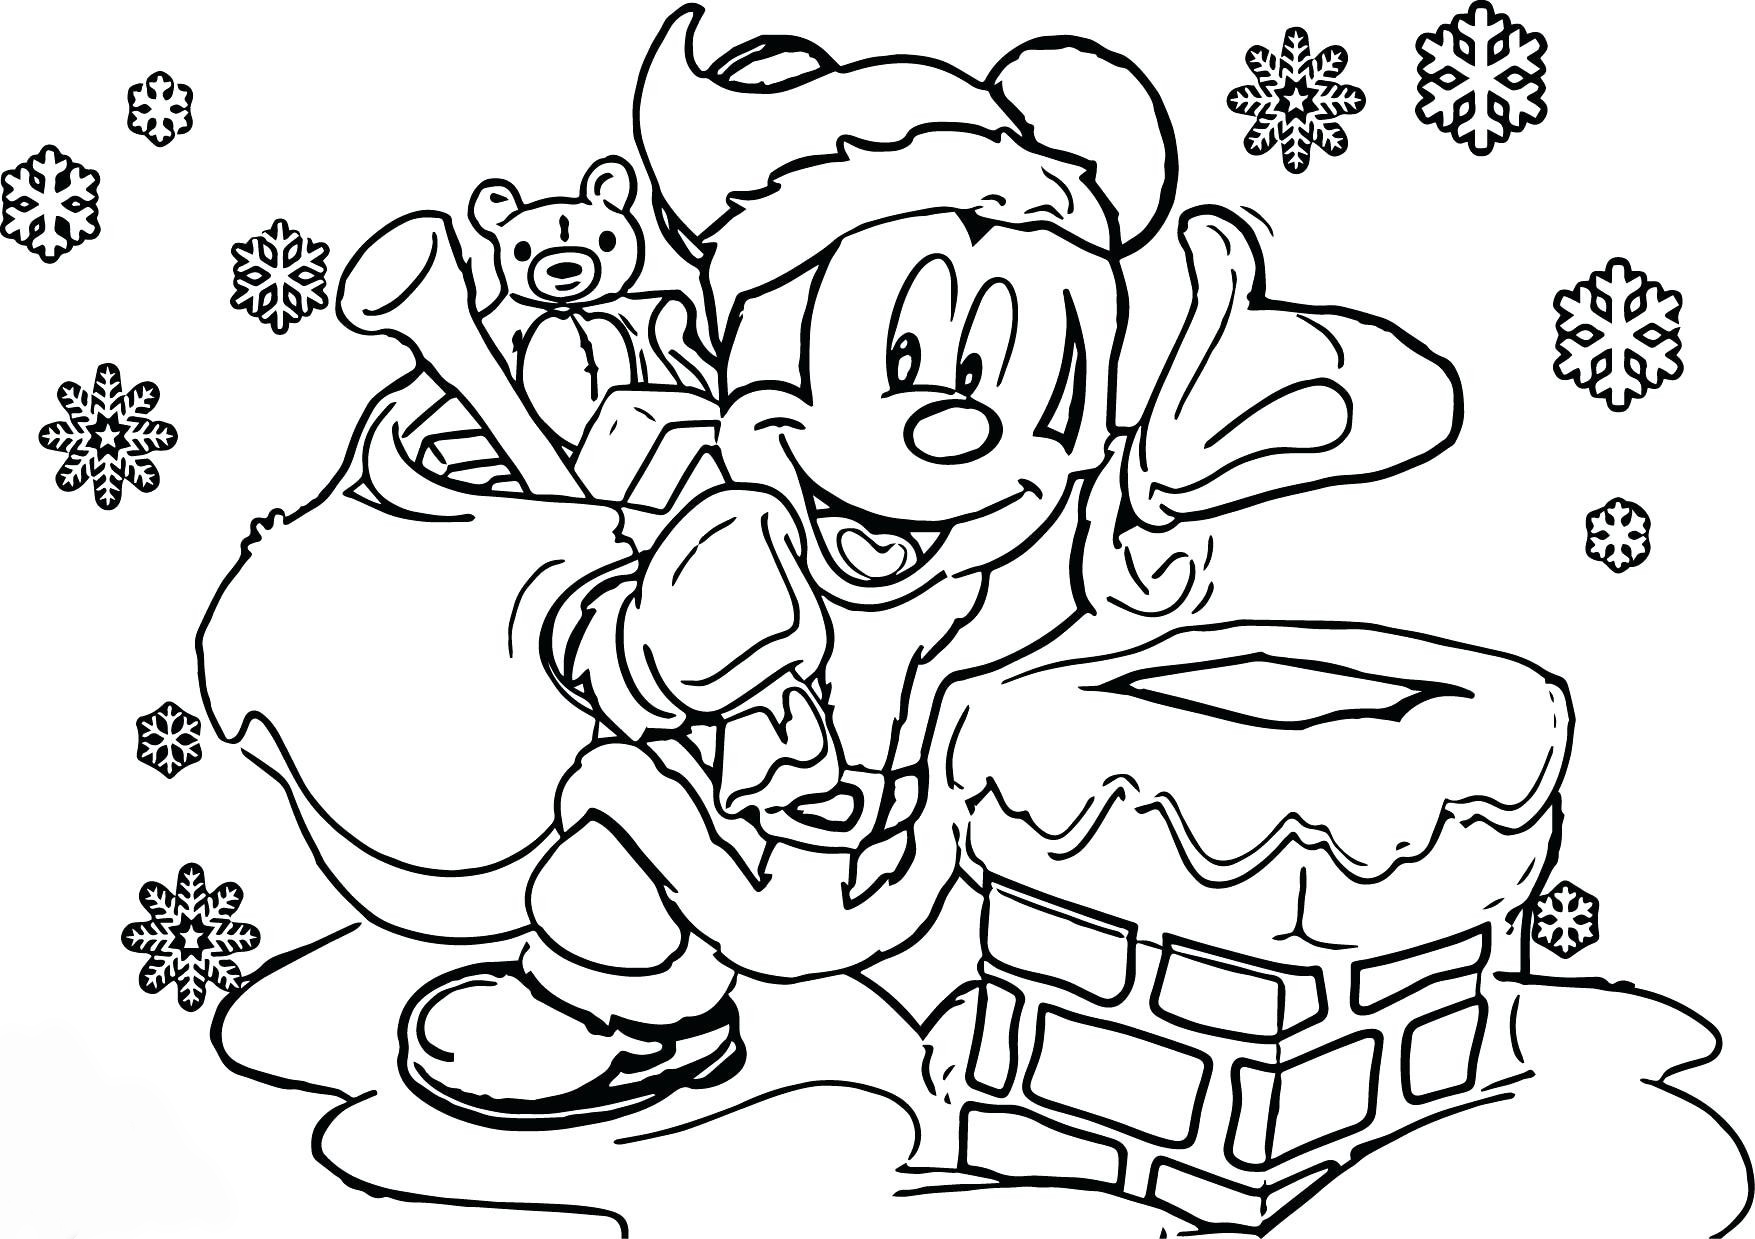 Download Mickey Mouse Christmas Coloring Pages - Best Coloring ...